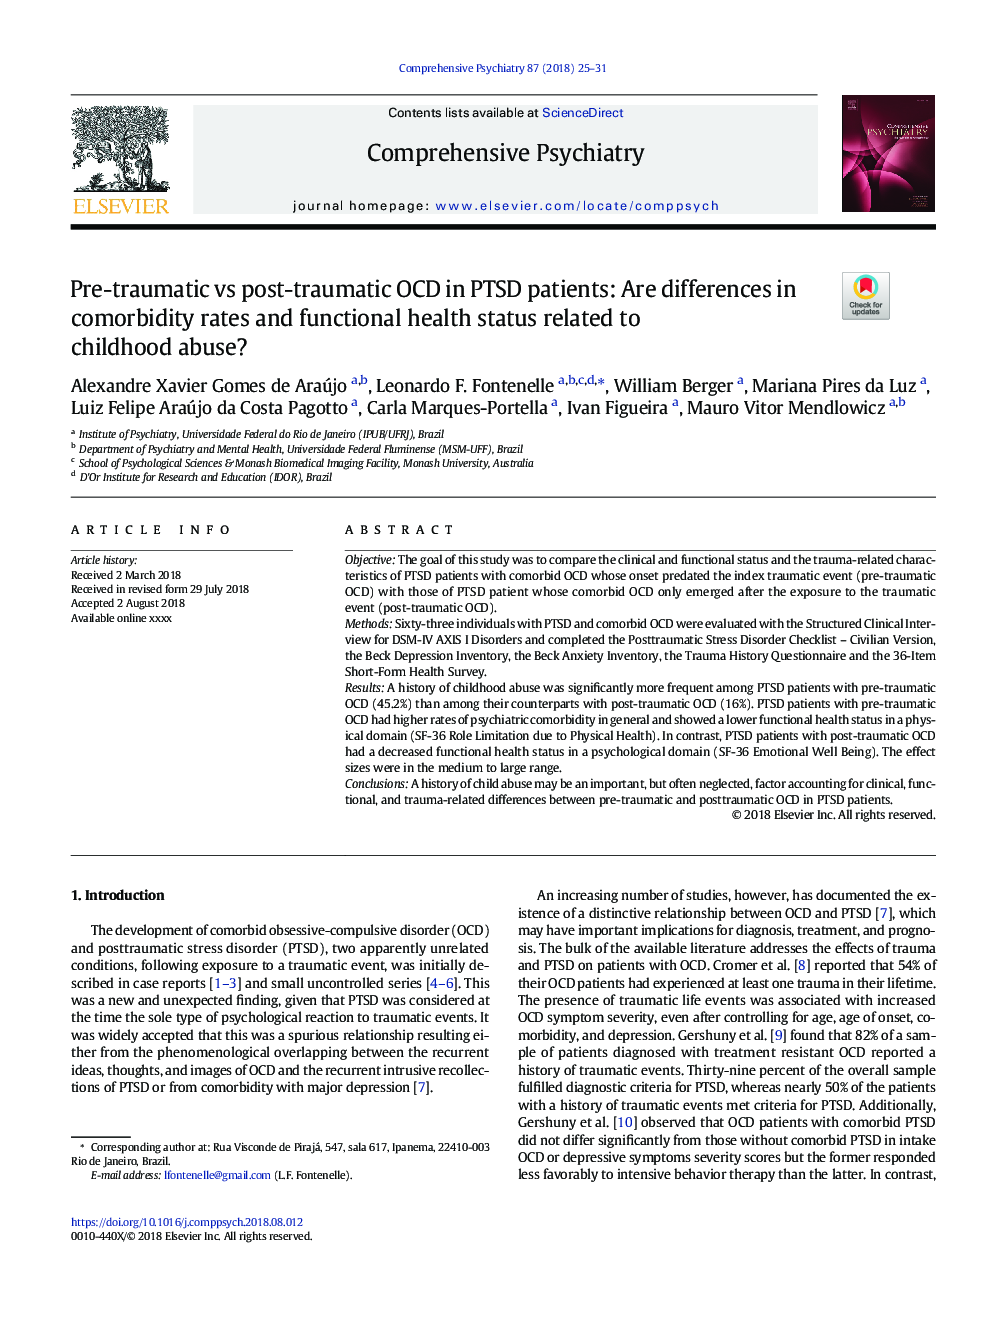 Pre-traumatic vs post-traumatic OCD in PTSD patients: Are differences in comorbidity rates and functional health status related to childhood abuse?